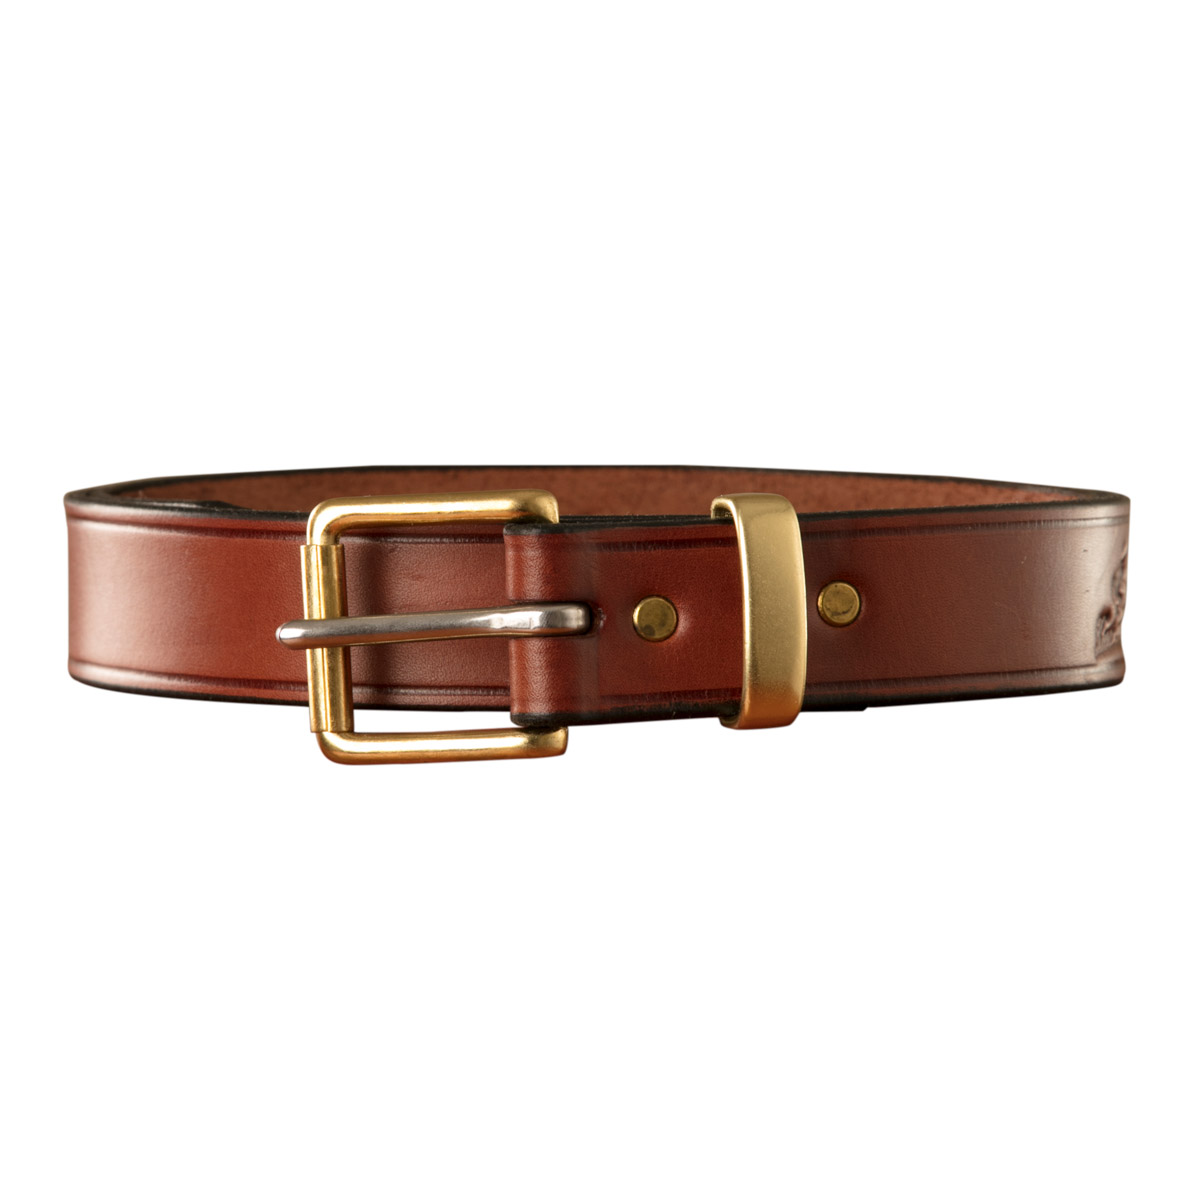 Dress Belt, Solid Leather, Brown, Buckle, Riveted 1